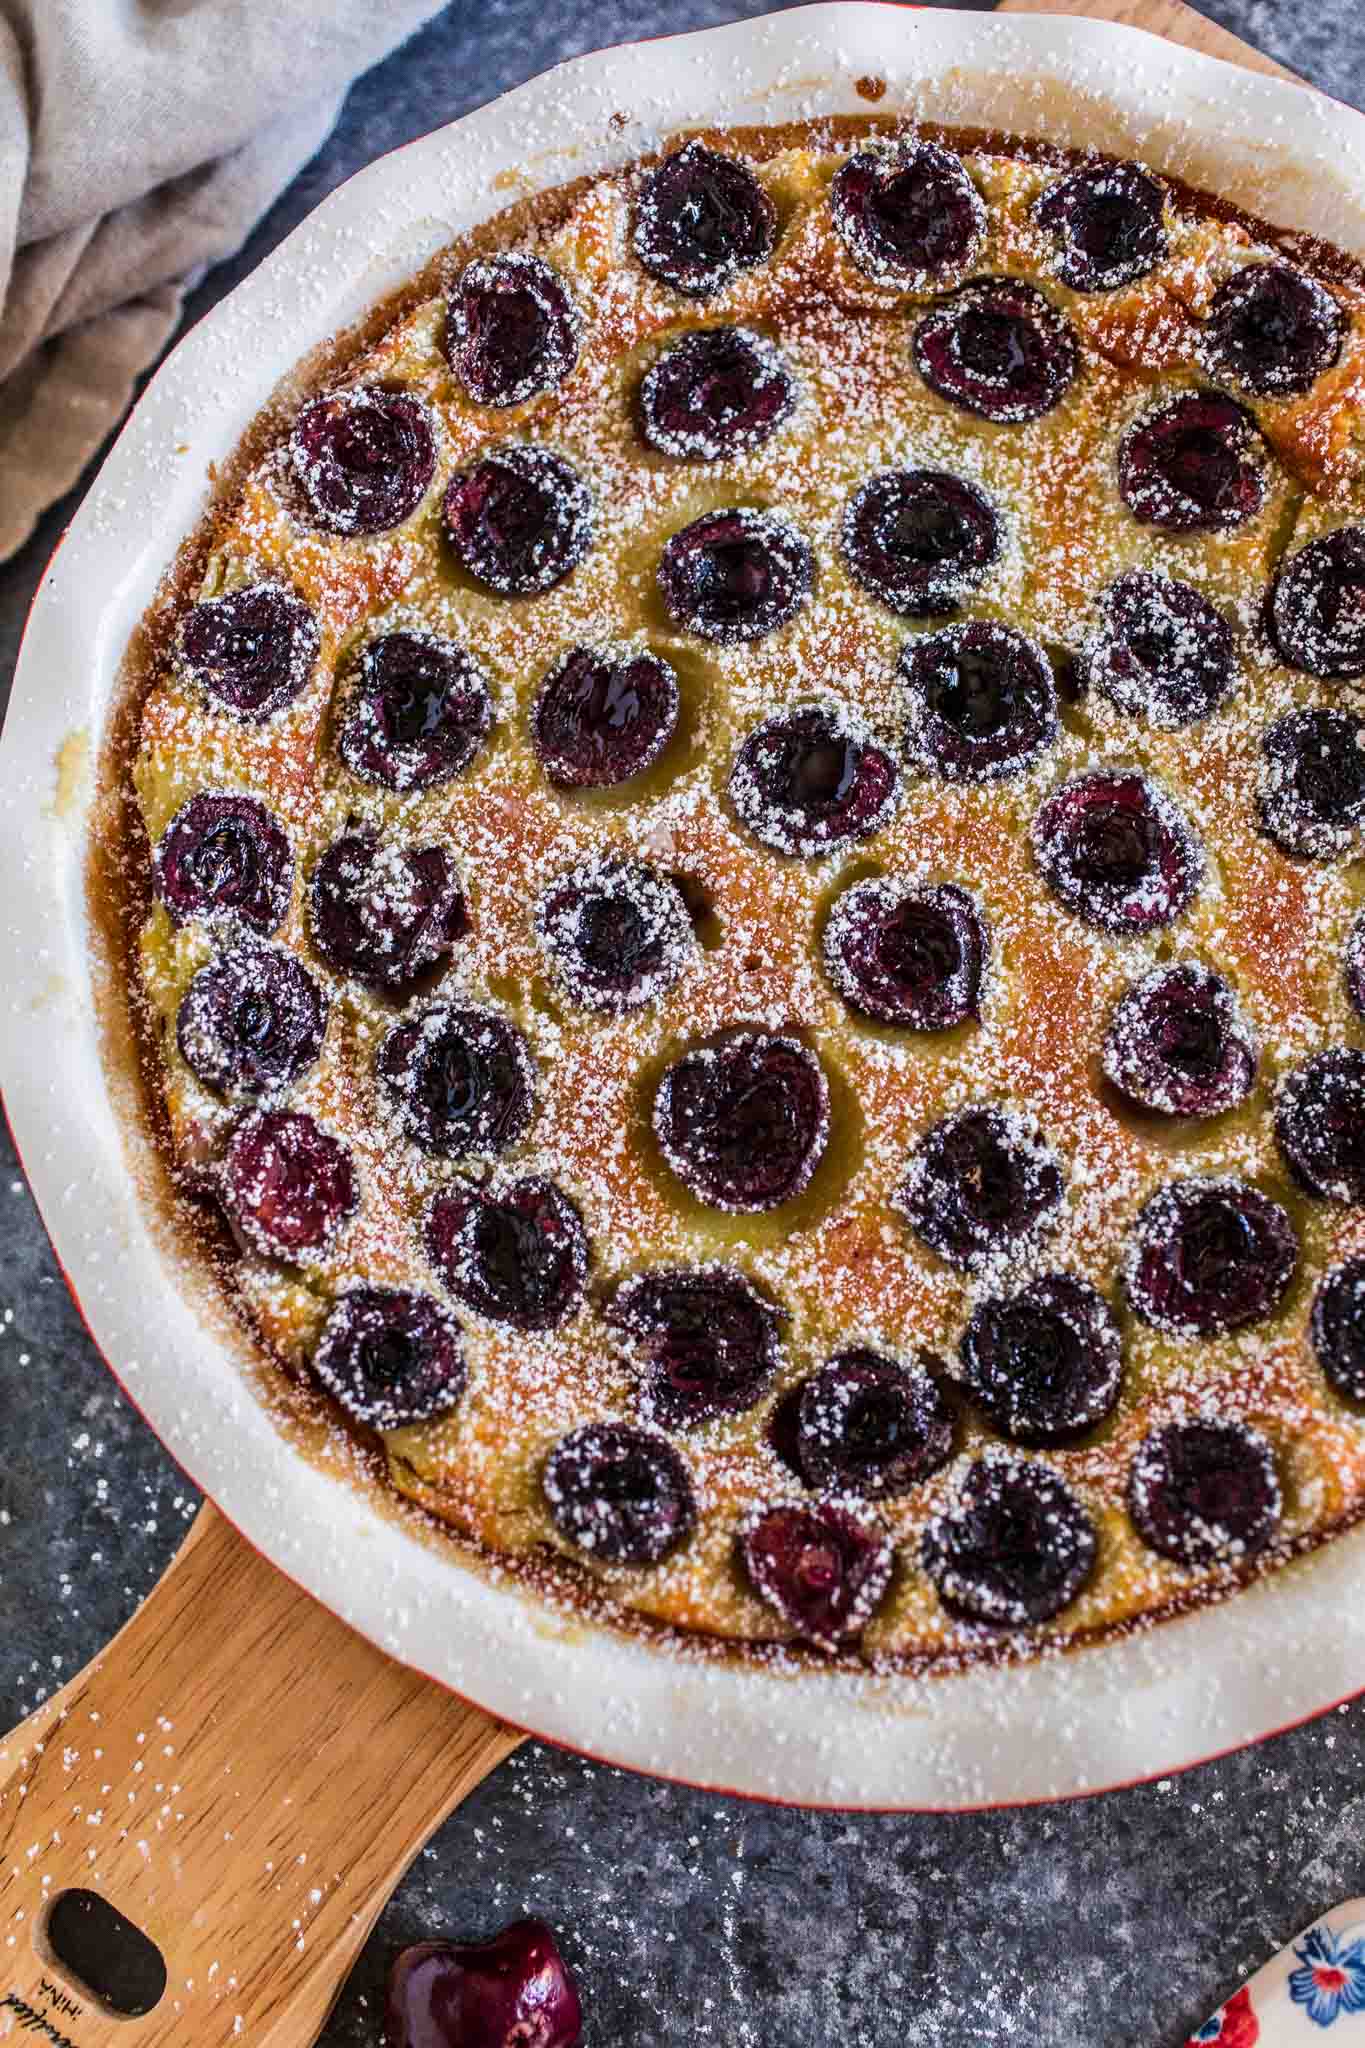 Cherry Clafoutis (Clafoutis aux Cerises) | www.oliviascuisine.com | A classic French dessert that combines seasonal cherries and a rich custard. Easy to make using a blender or by hand, with a whisk!